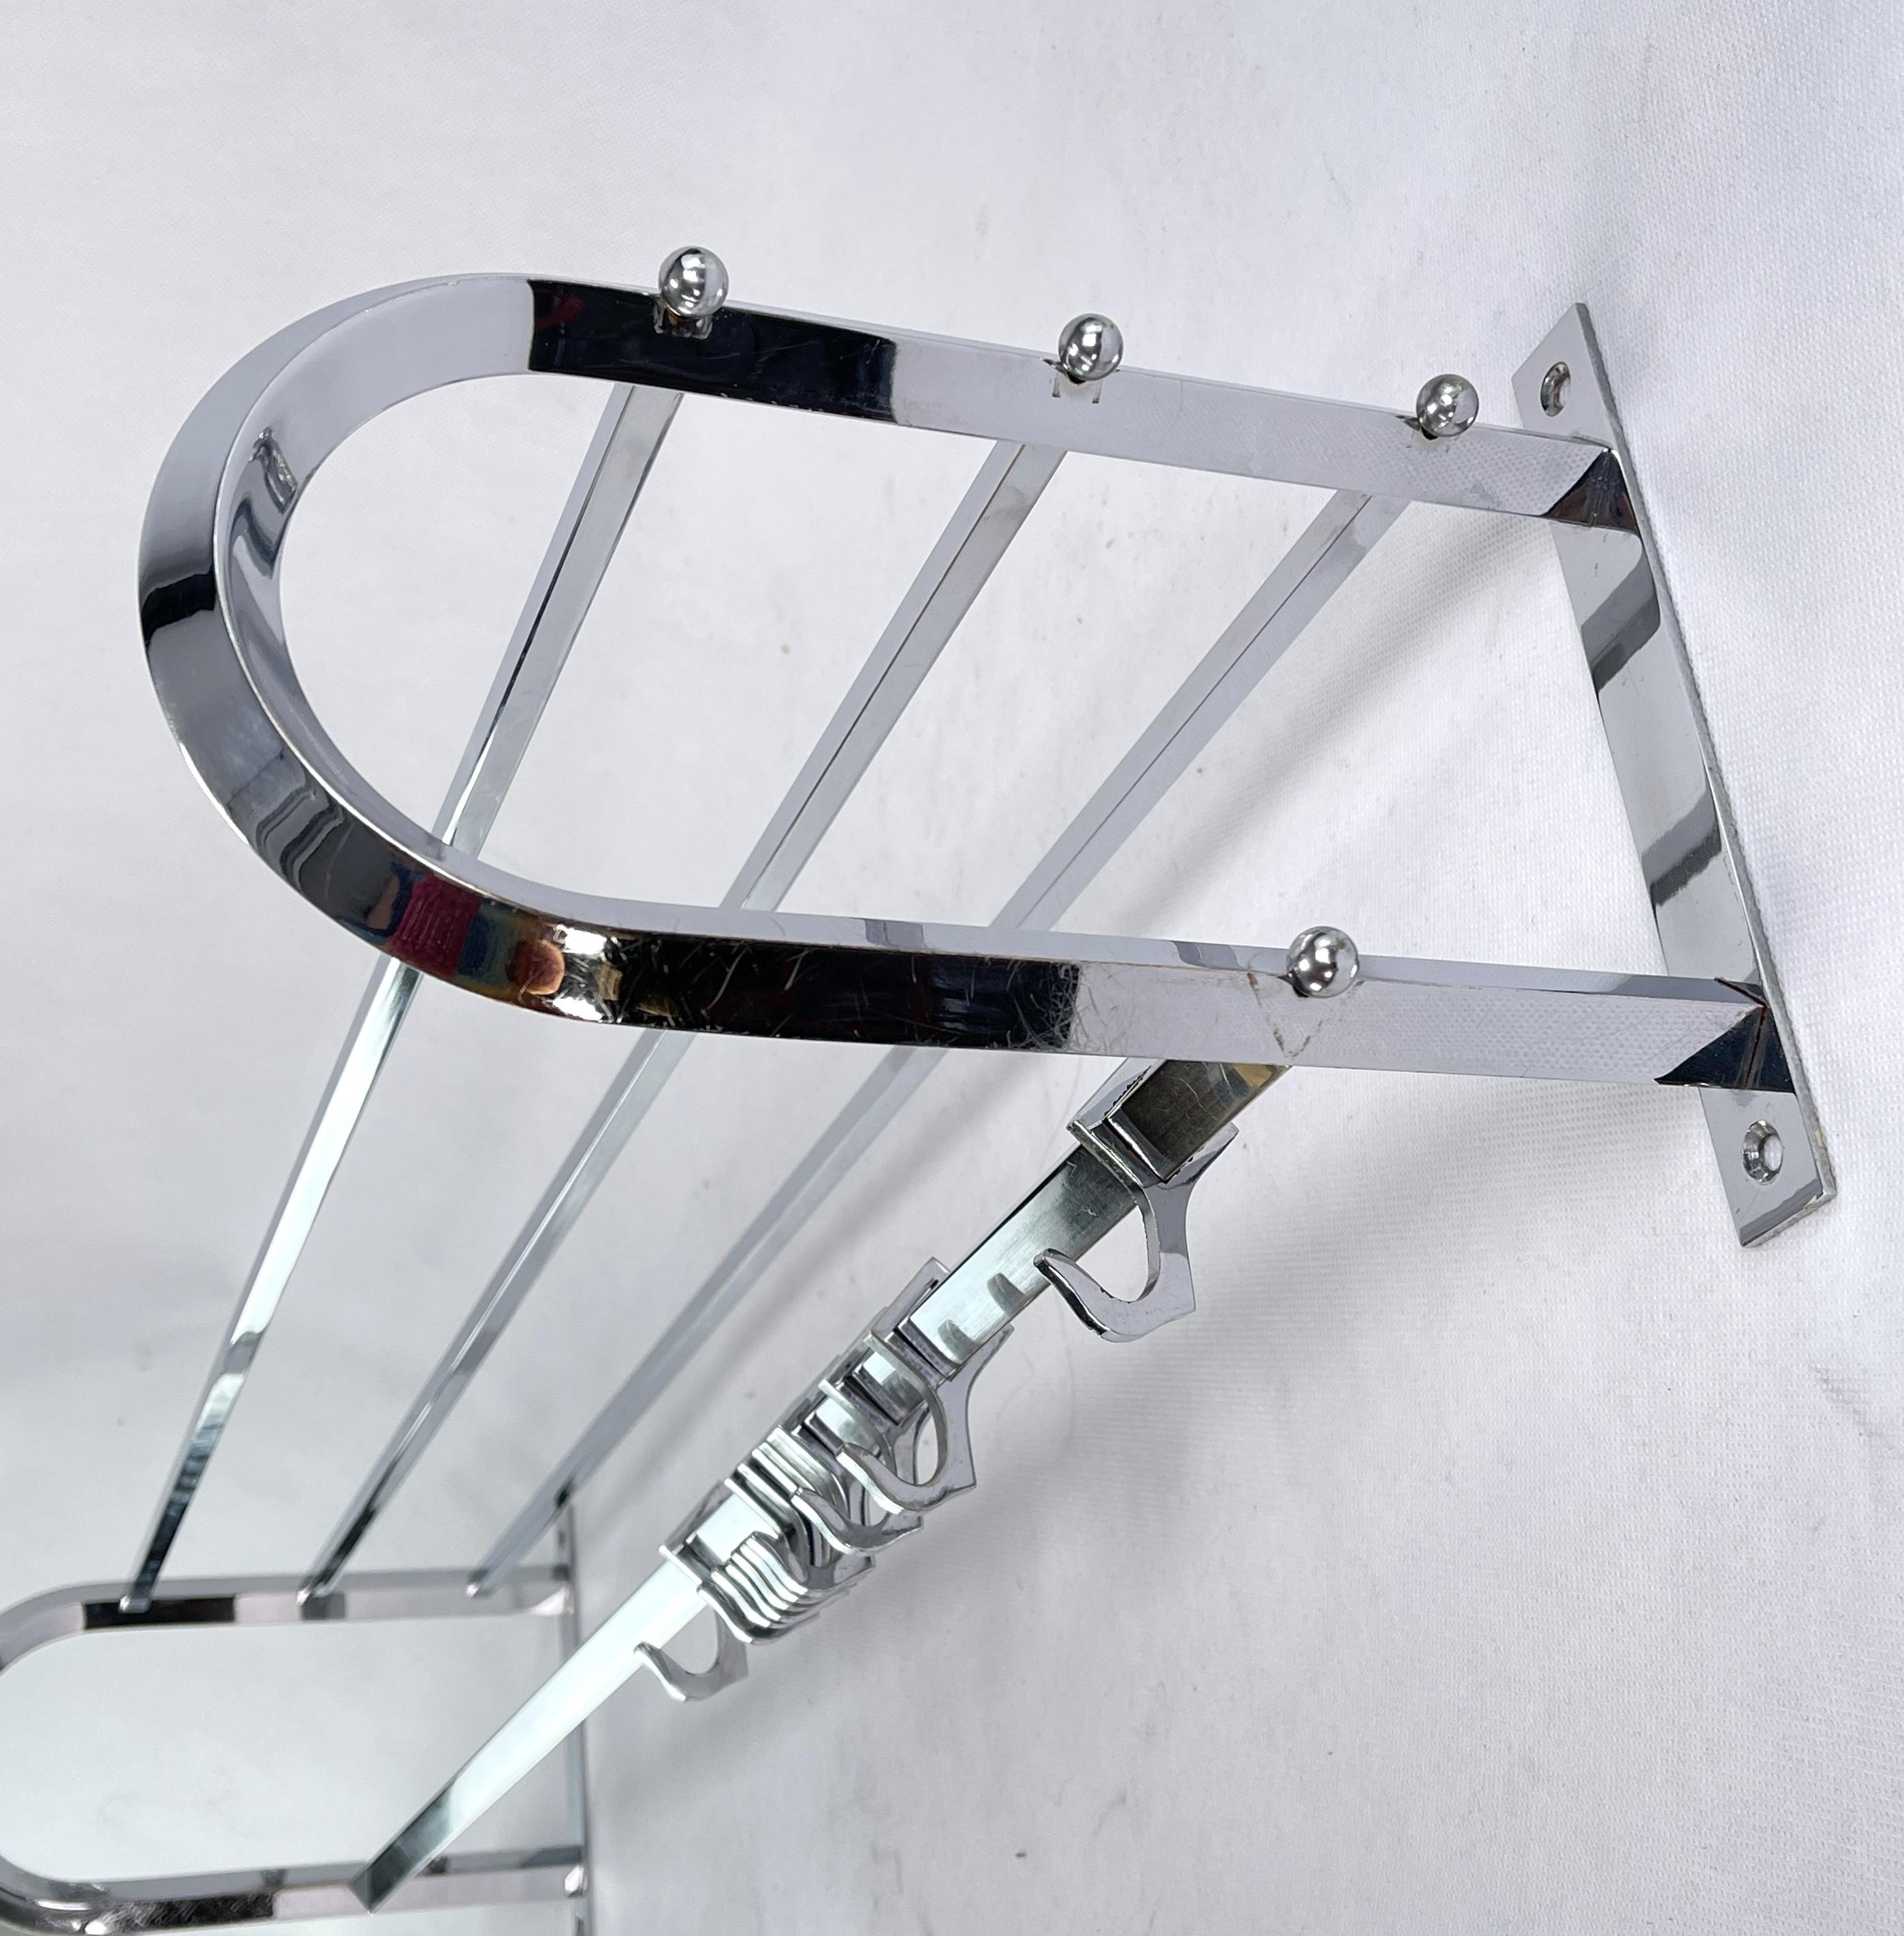 Art Deco wardrobe chrome - 1930s.

This beautiful french wall coat rack from the 1930s is in the streamline modern Art Deco style. This style emphasized curvy streamlined shapes. This is a beautiful, timeless and antique piece that will leave a